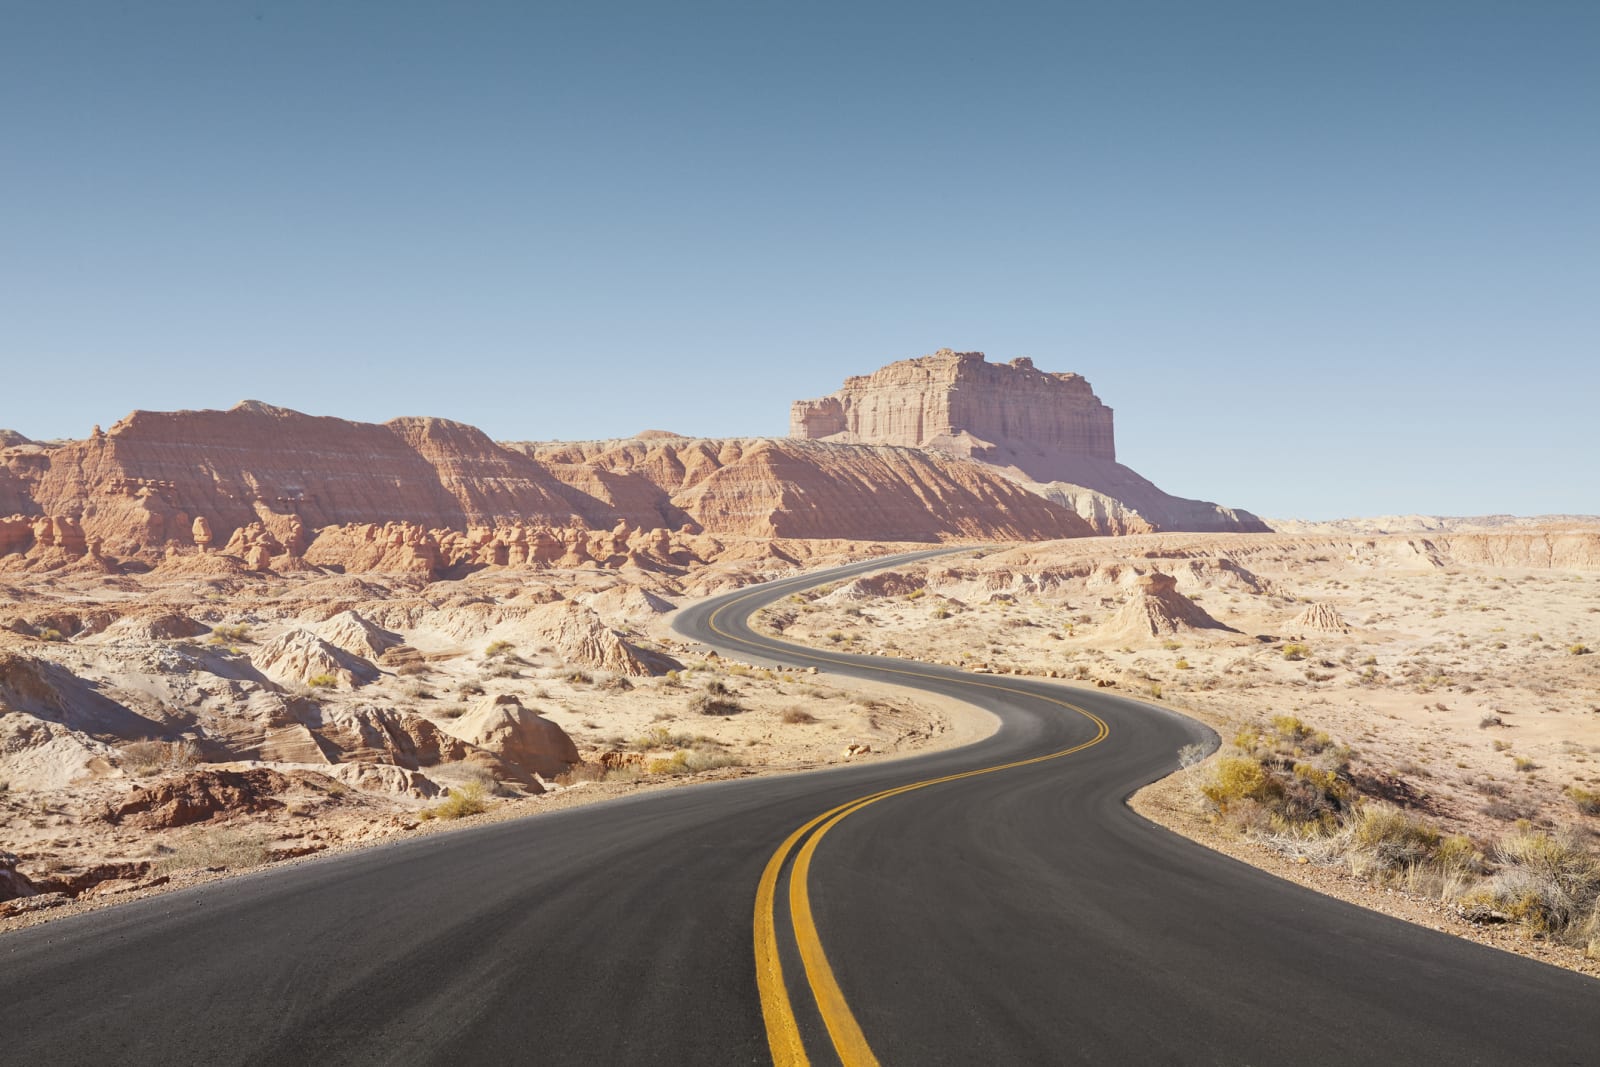 A long winding road through the desert in the USA